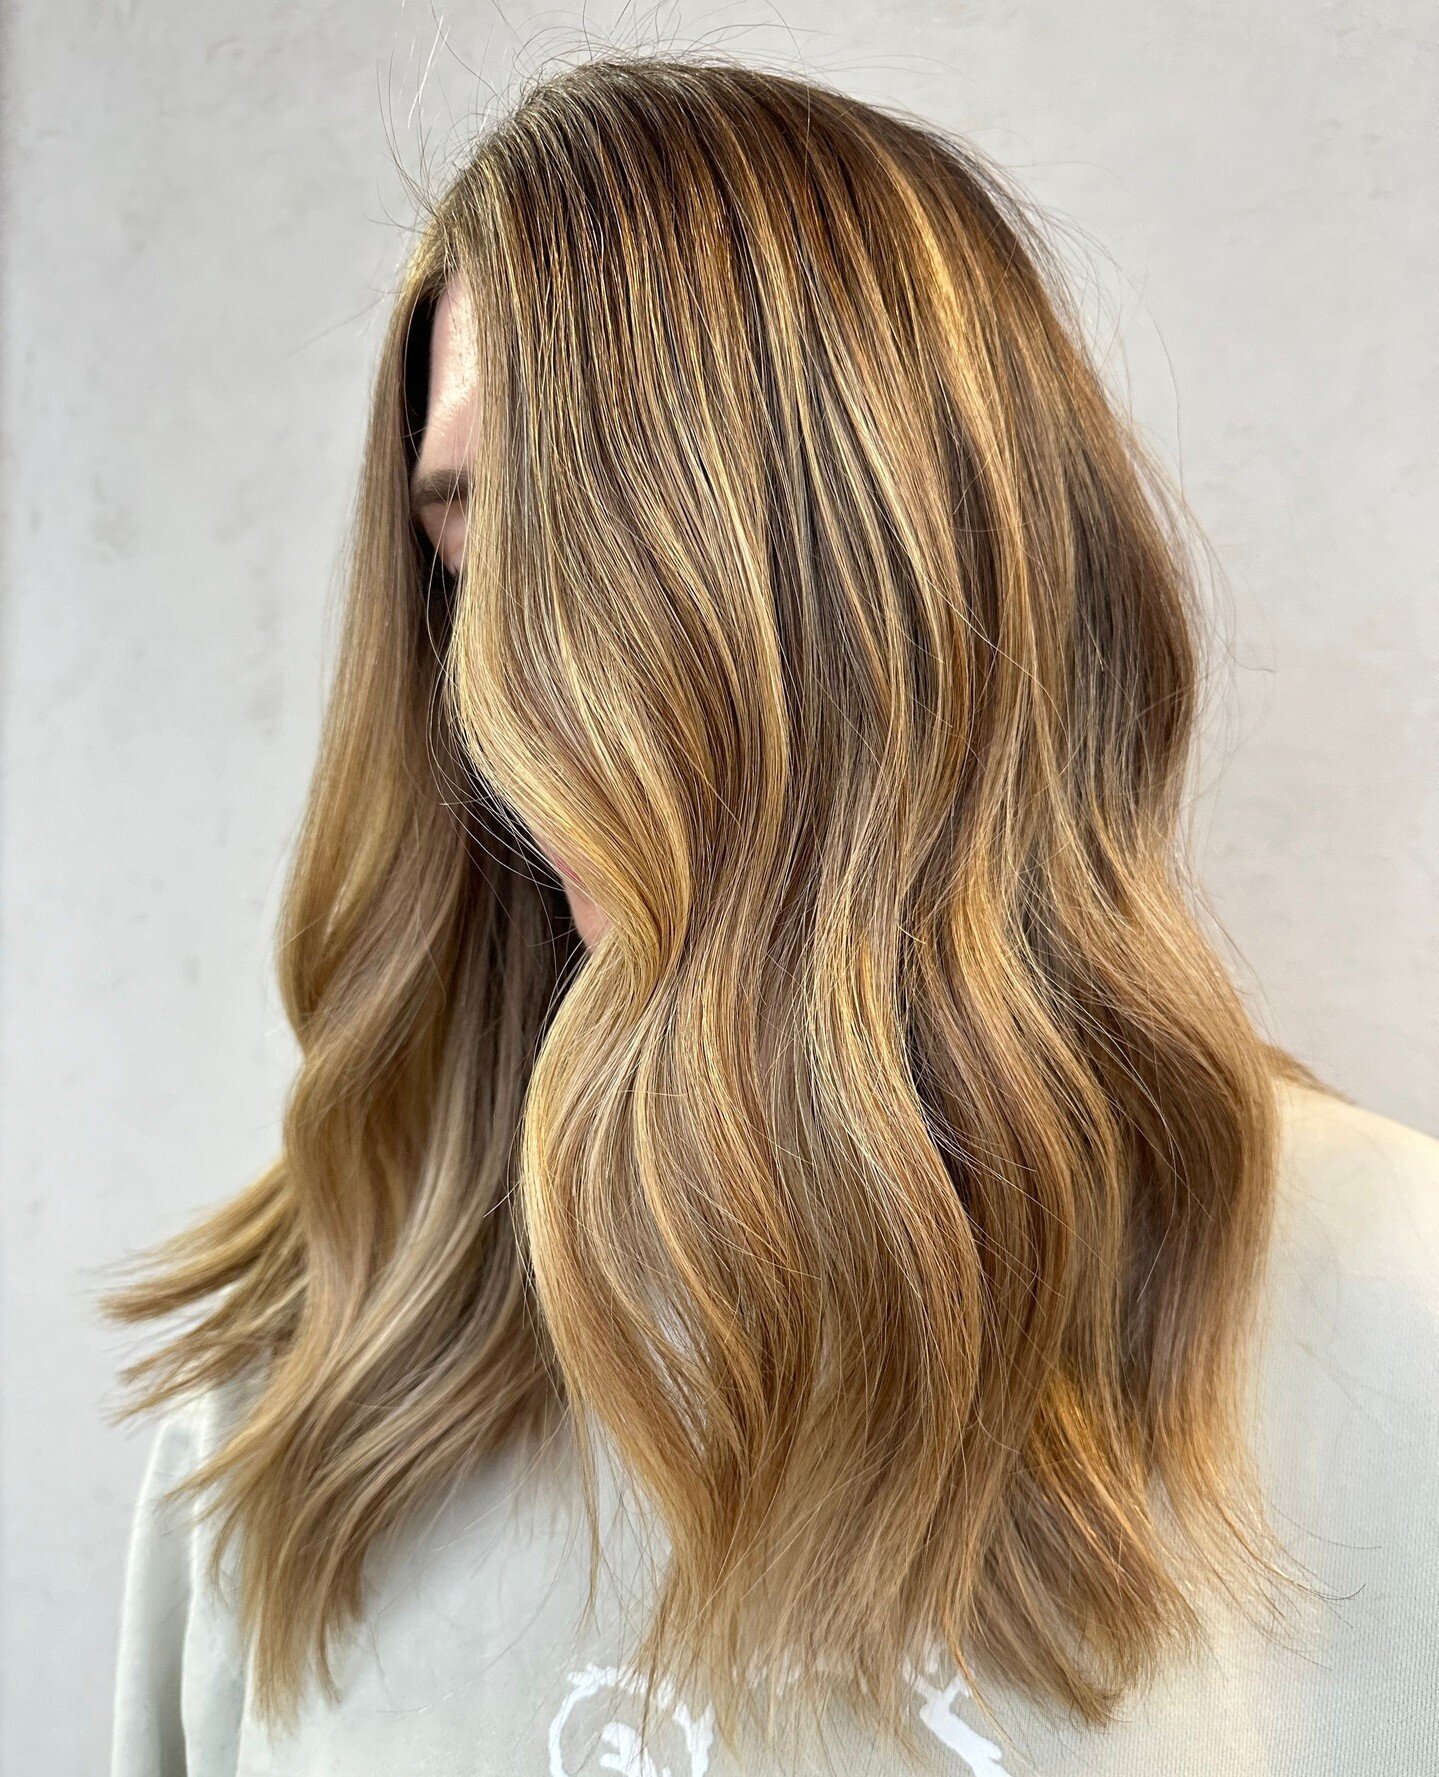 What to ask for: Blended with subtle pops of brightness⁠
⁠
She wanted something to feel fresh for the new season but still low maintenance for between appointments. She wanted to have brightness around her face but not a bold money piece. ⁠
⁠
Allana 